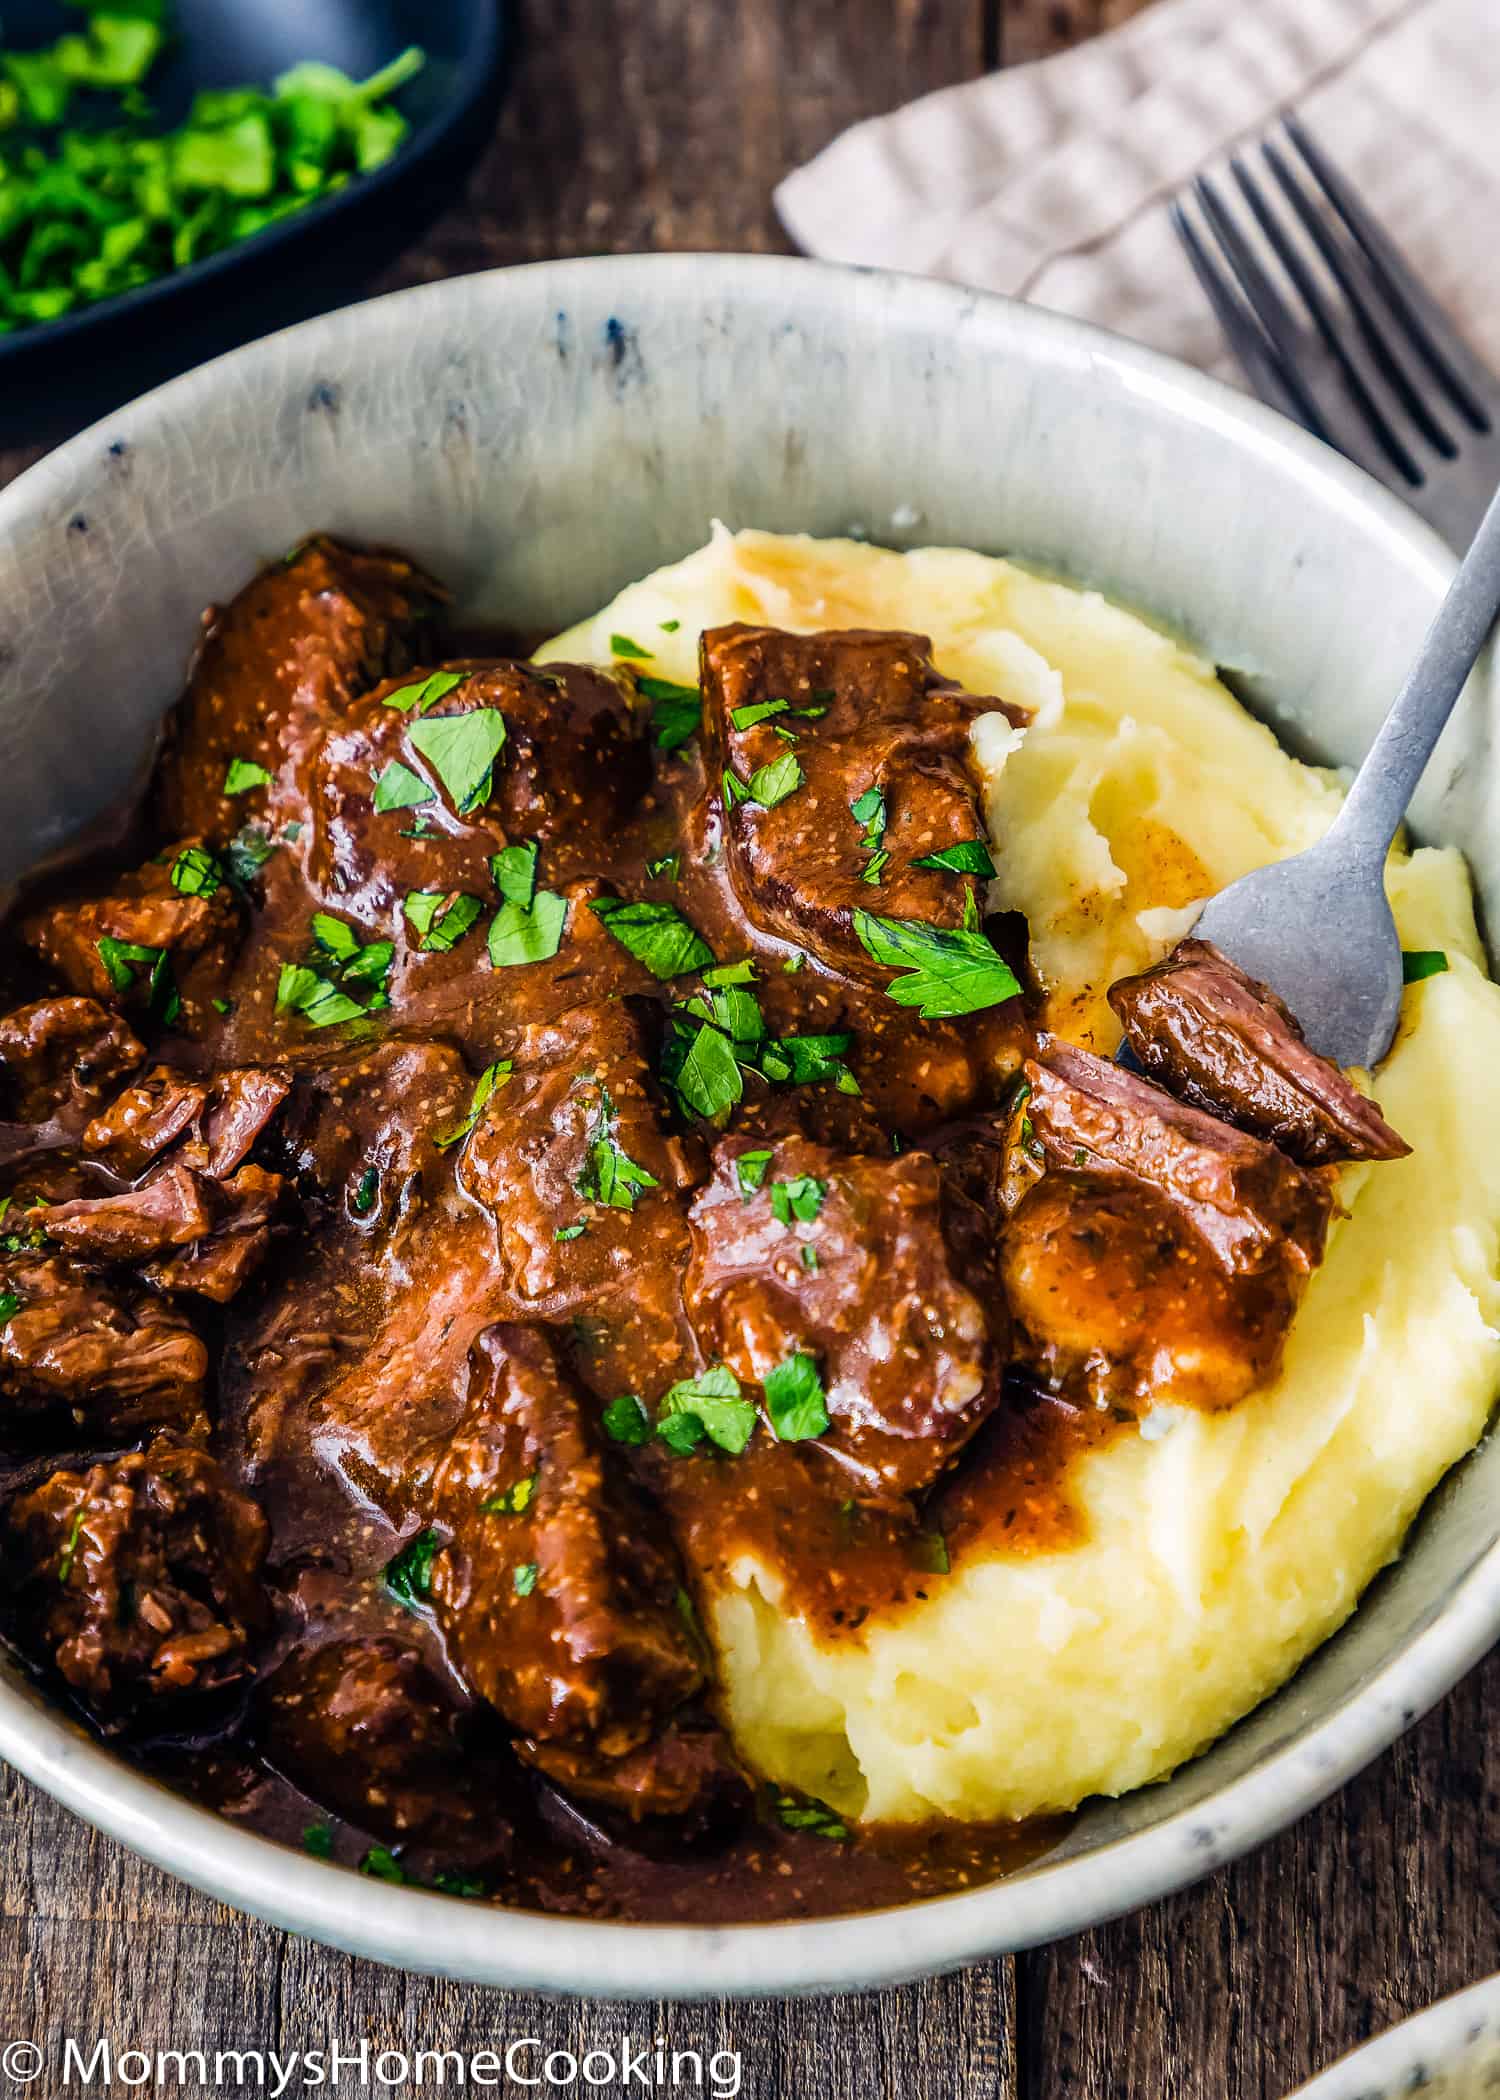 Easy Instant Pot Beef Tips with Gravy in a bowl with mashed potatoes.